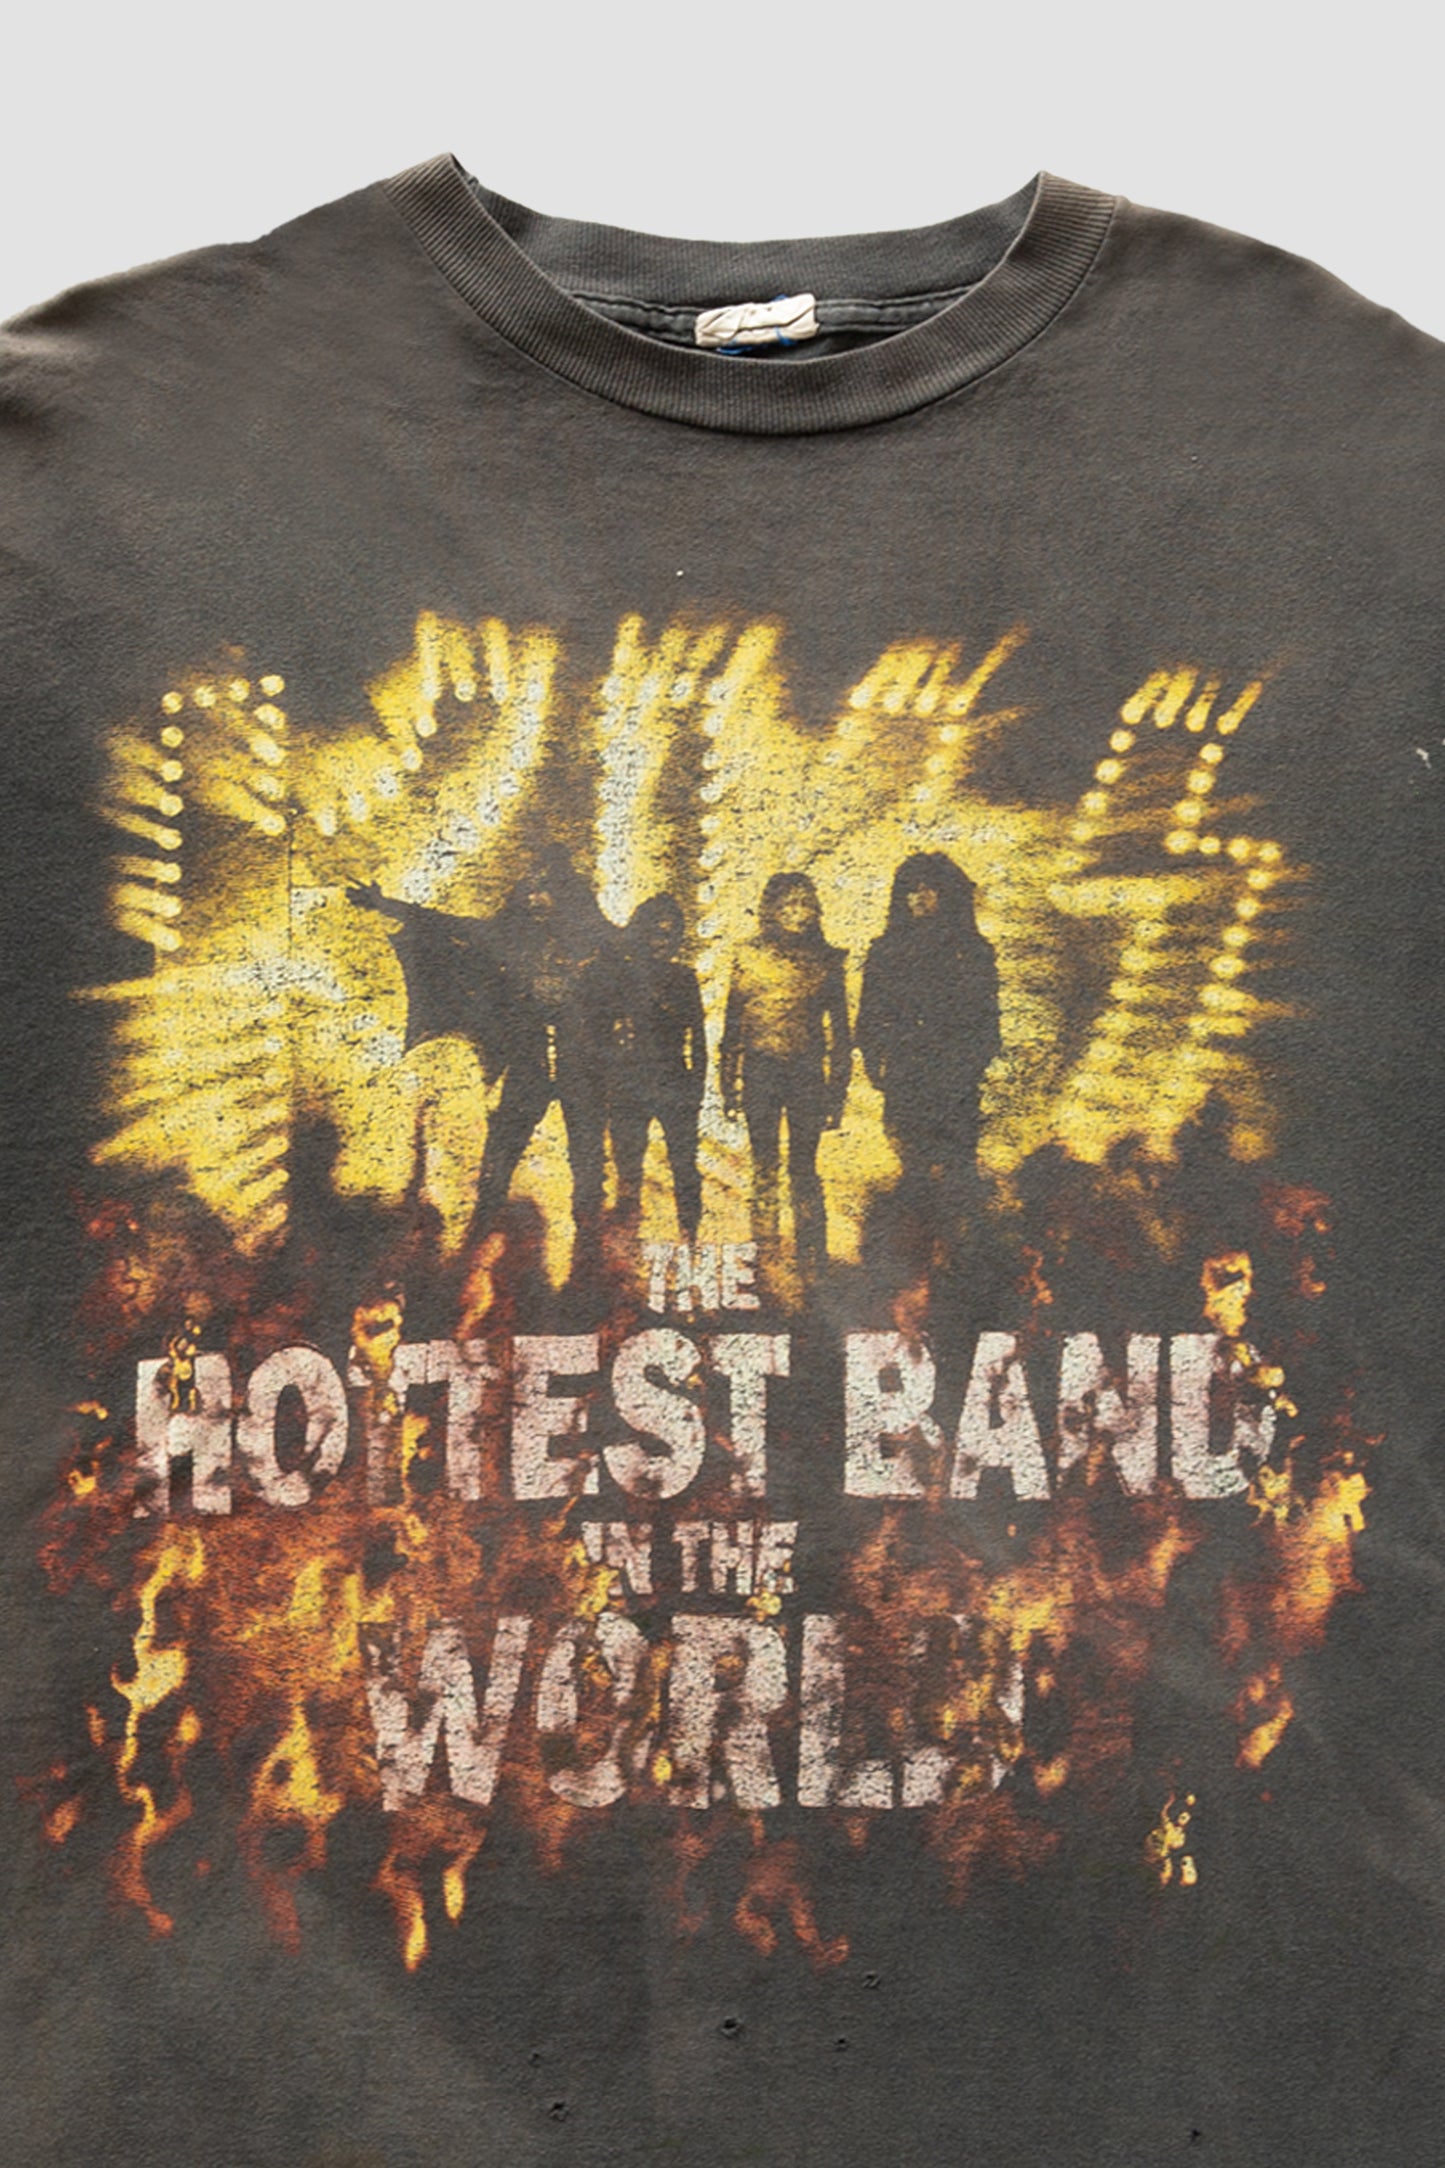 KISS Hottest Band Tee